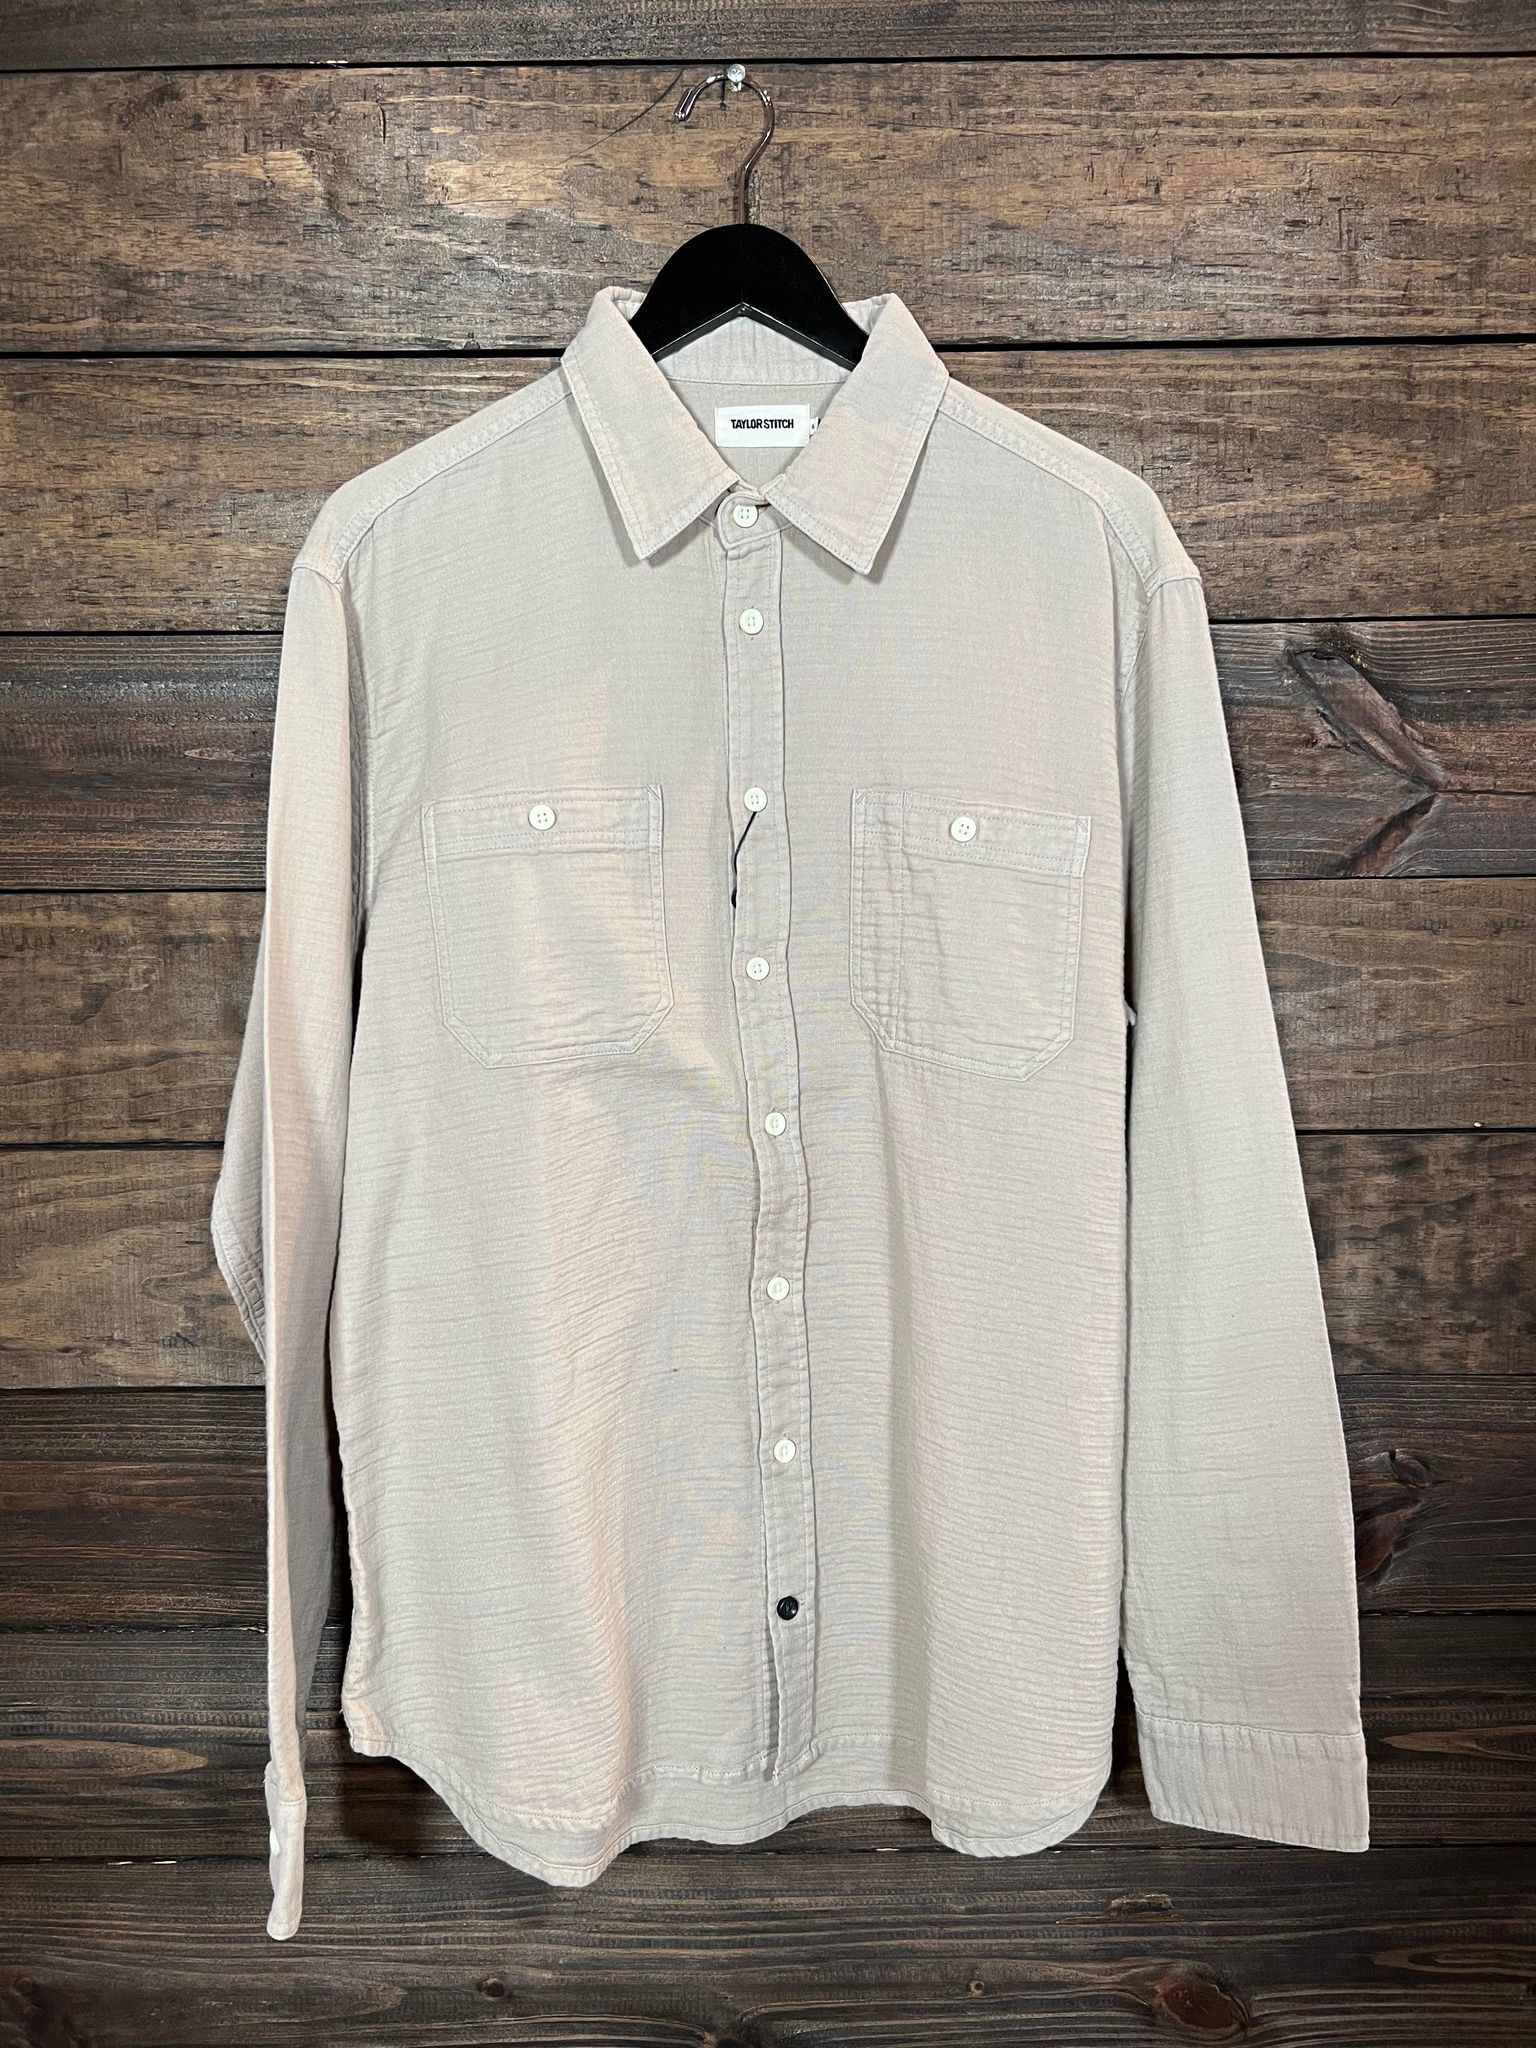 Taylor Stitch - The Utility Shirt in Stone Double